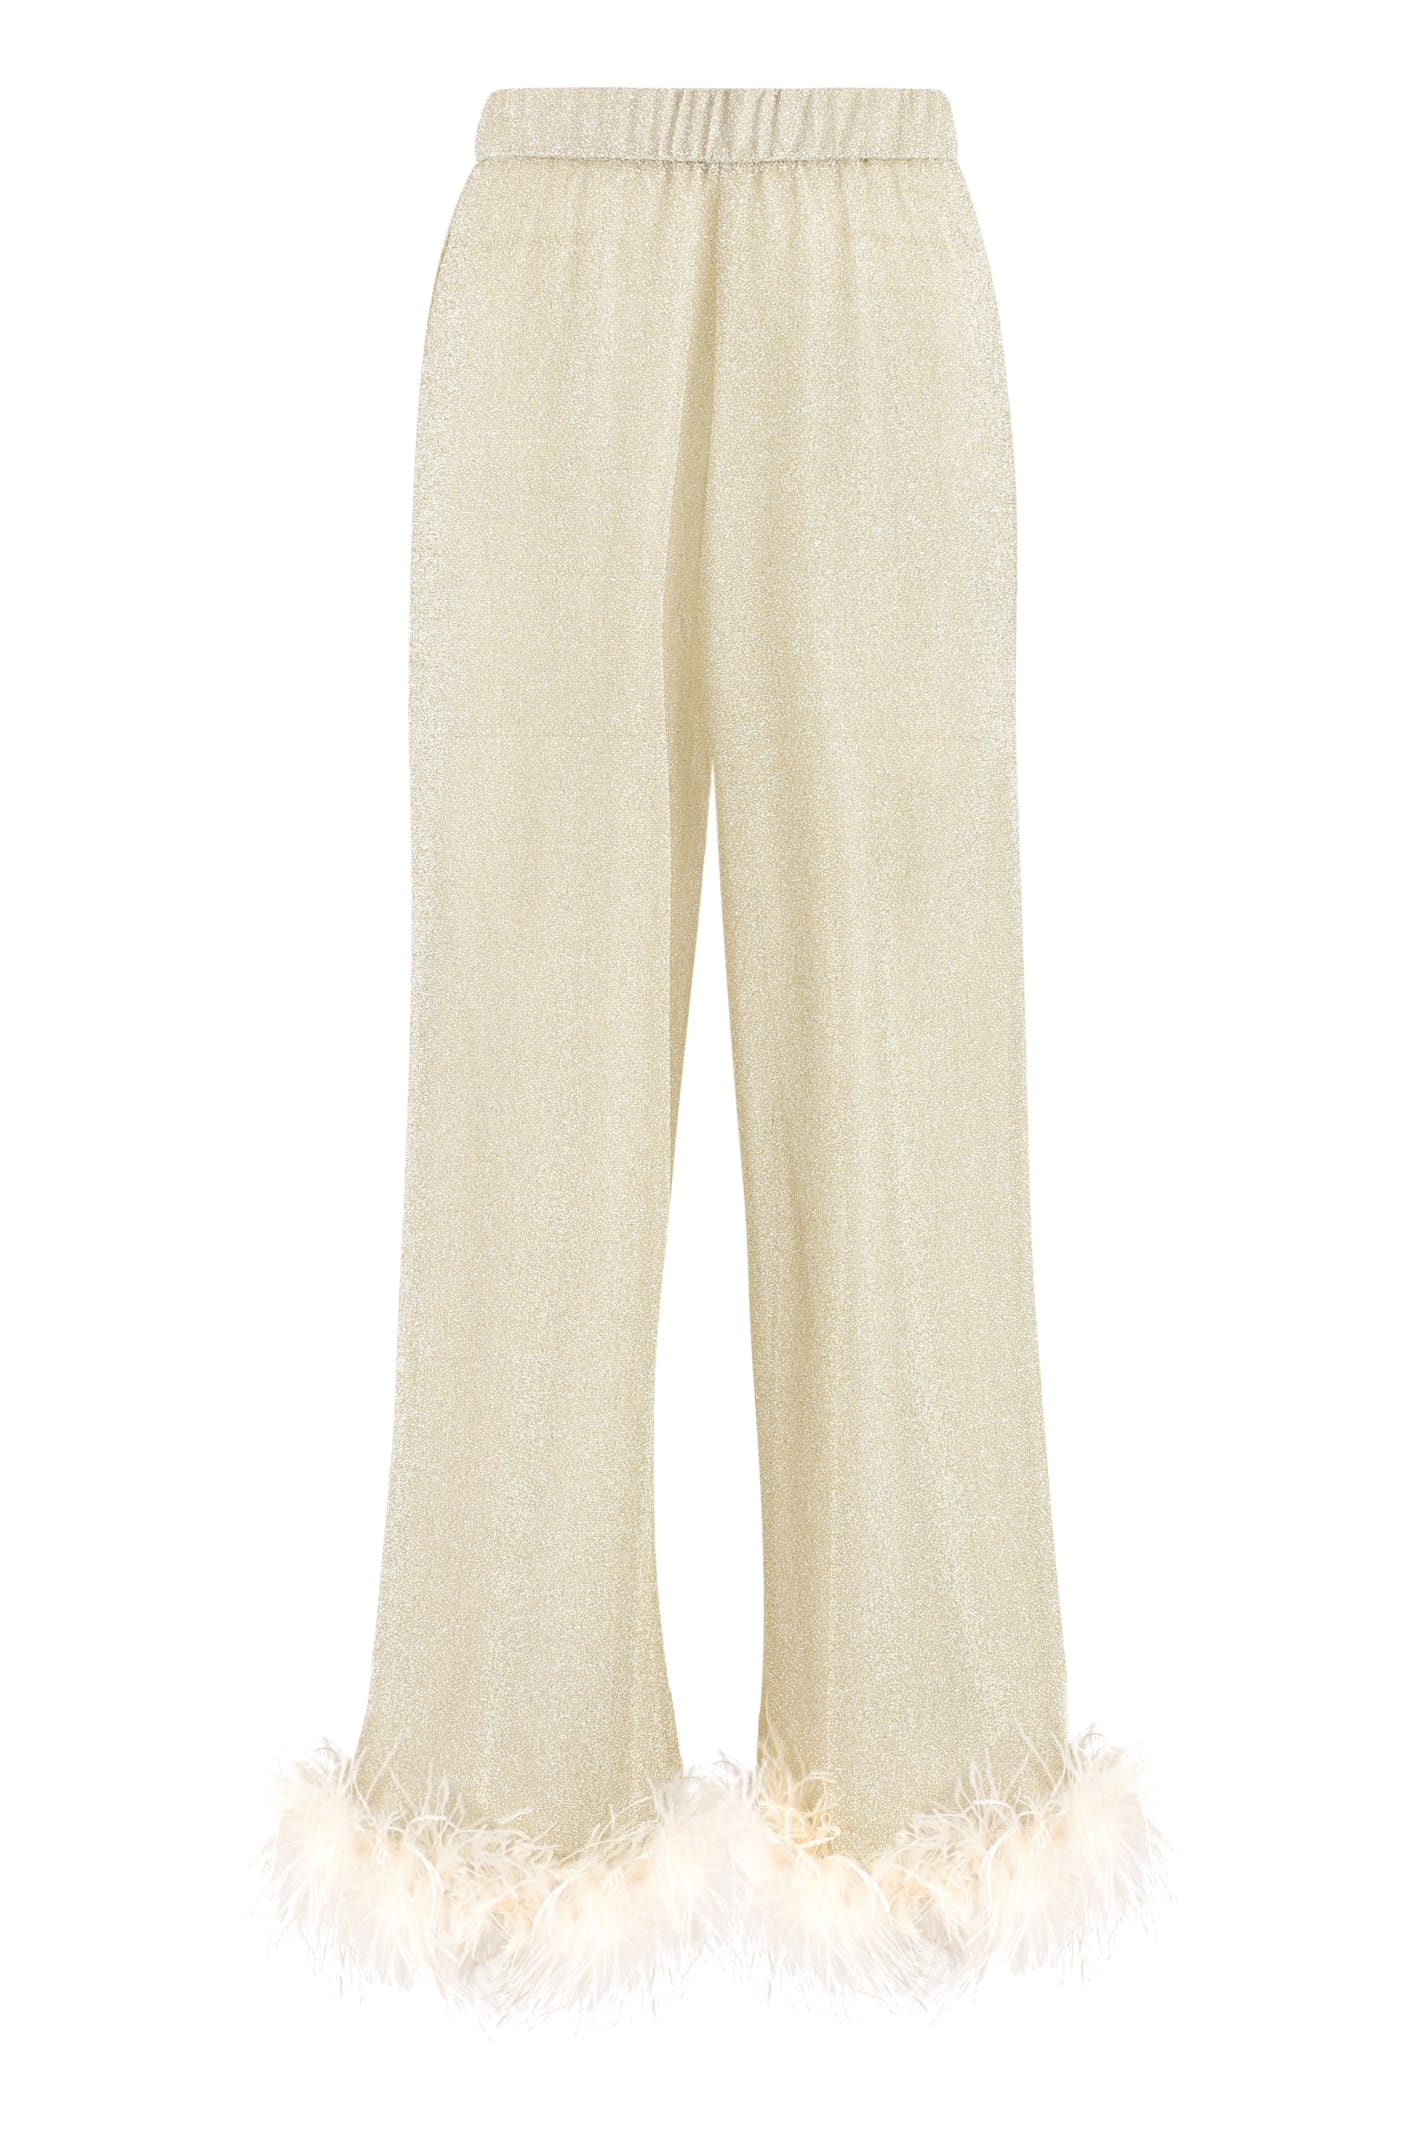 OSEREE LUMIÈRE JERSEY TROUSERS